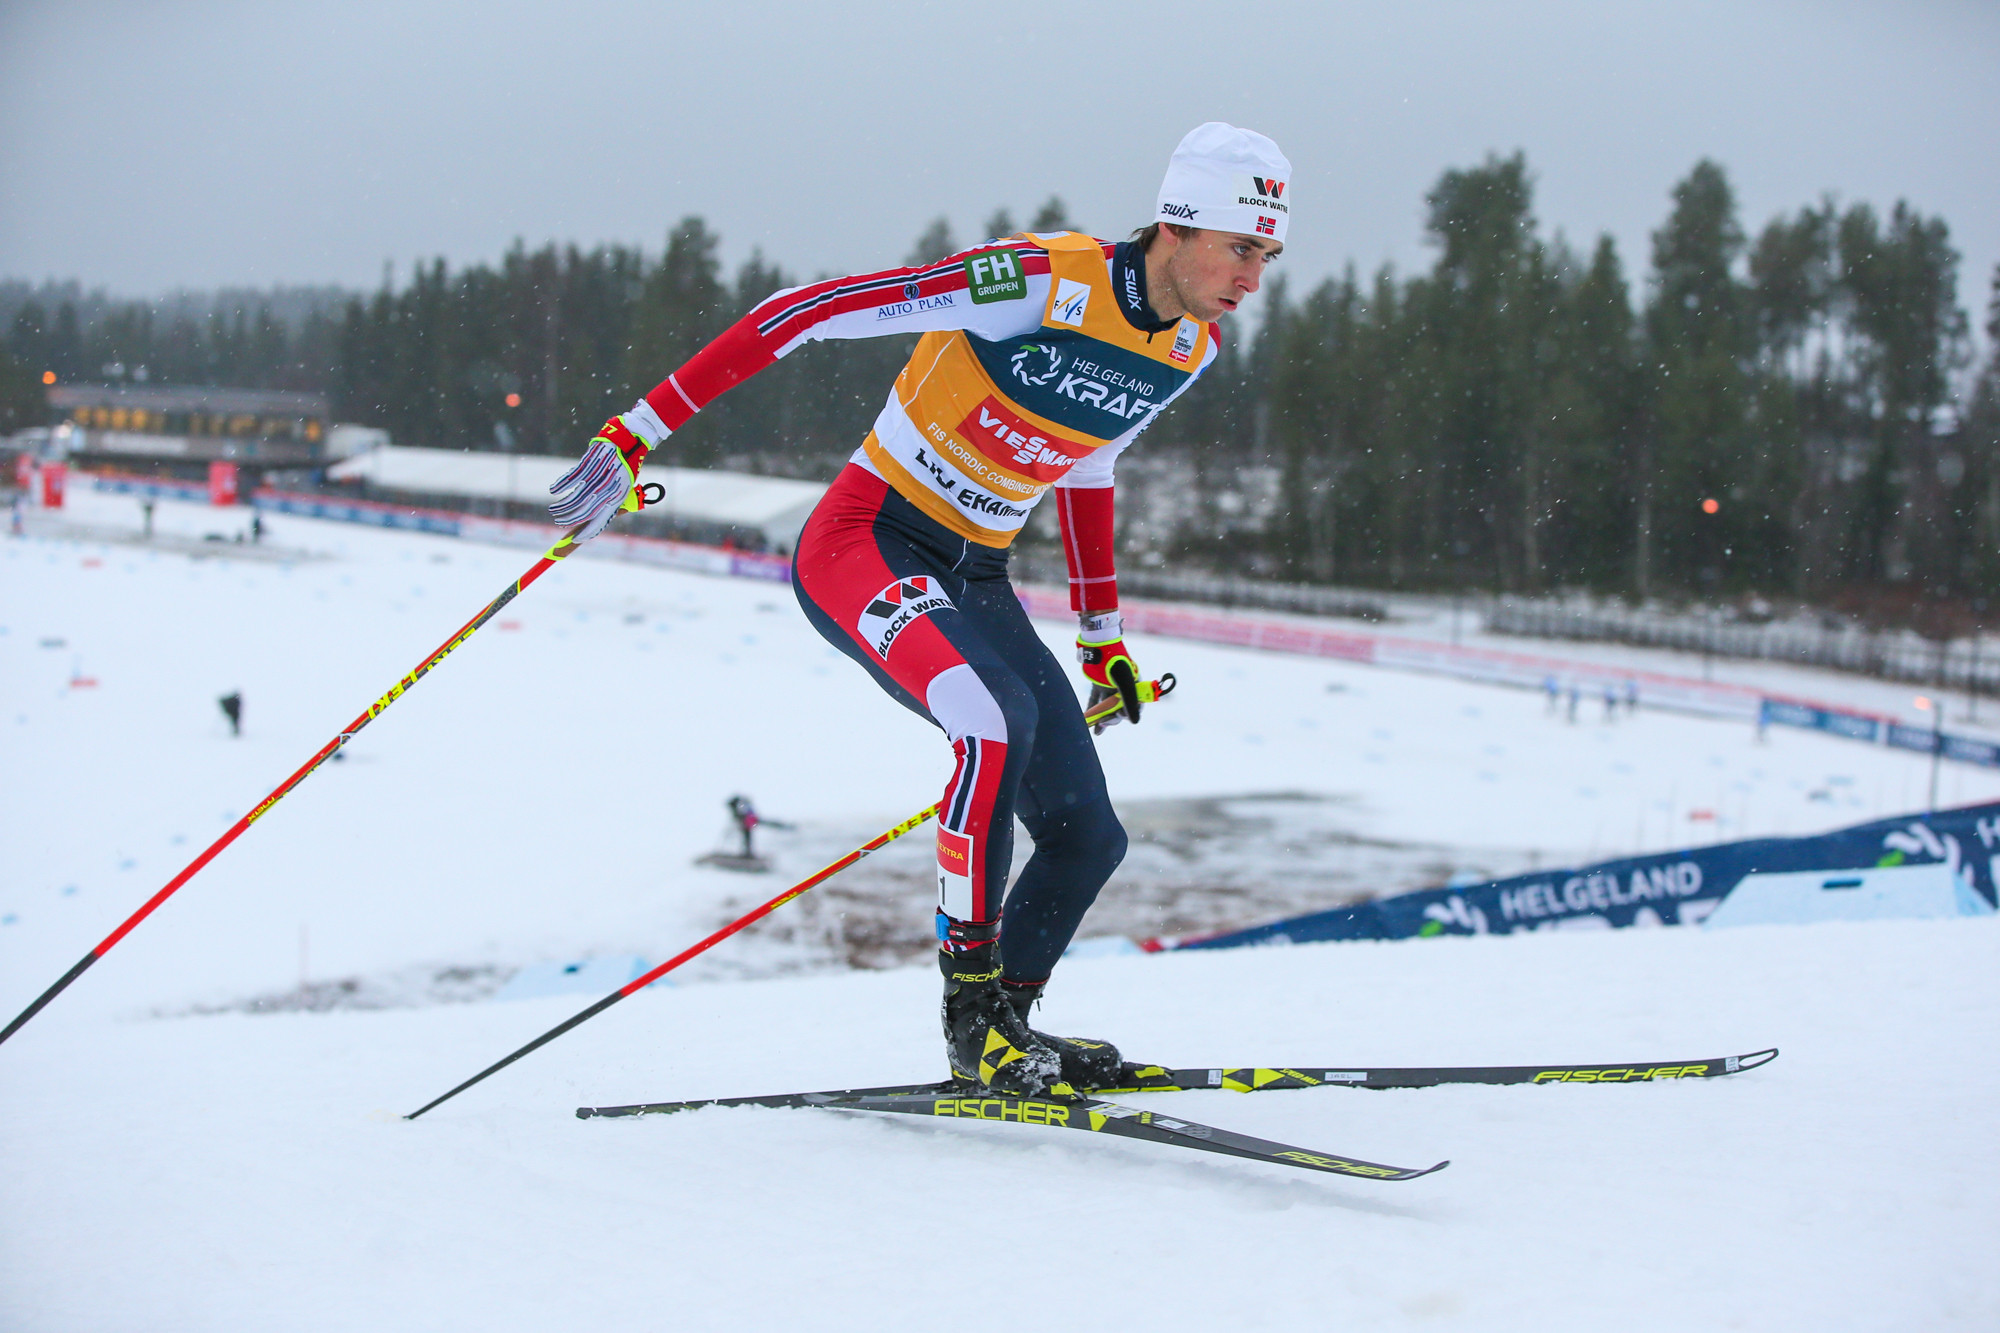 Two for two in Trondheim as Riiber's Nordic Combined World Cup dominance continues 